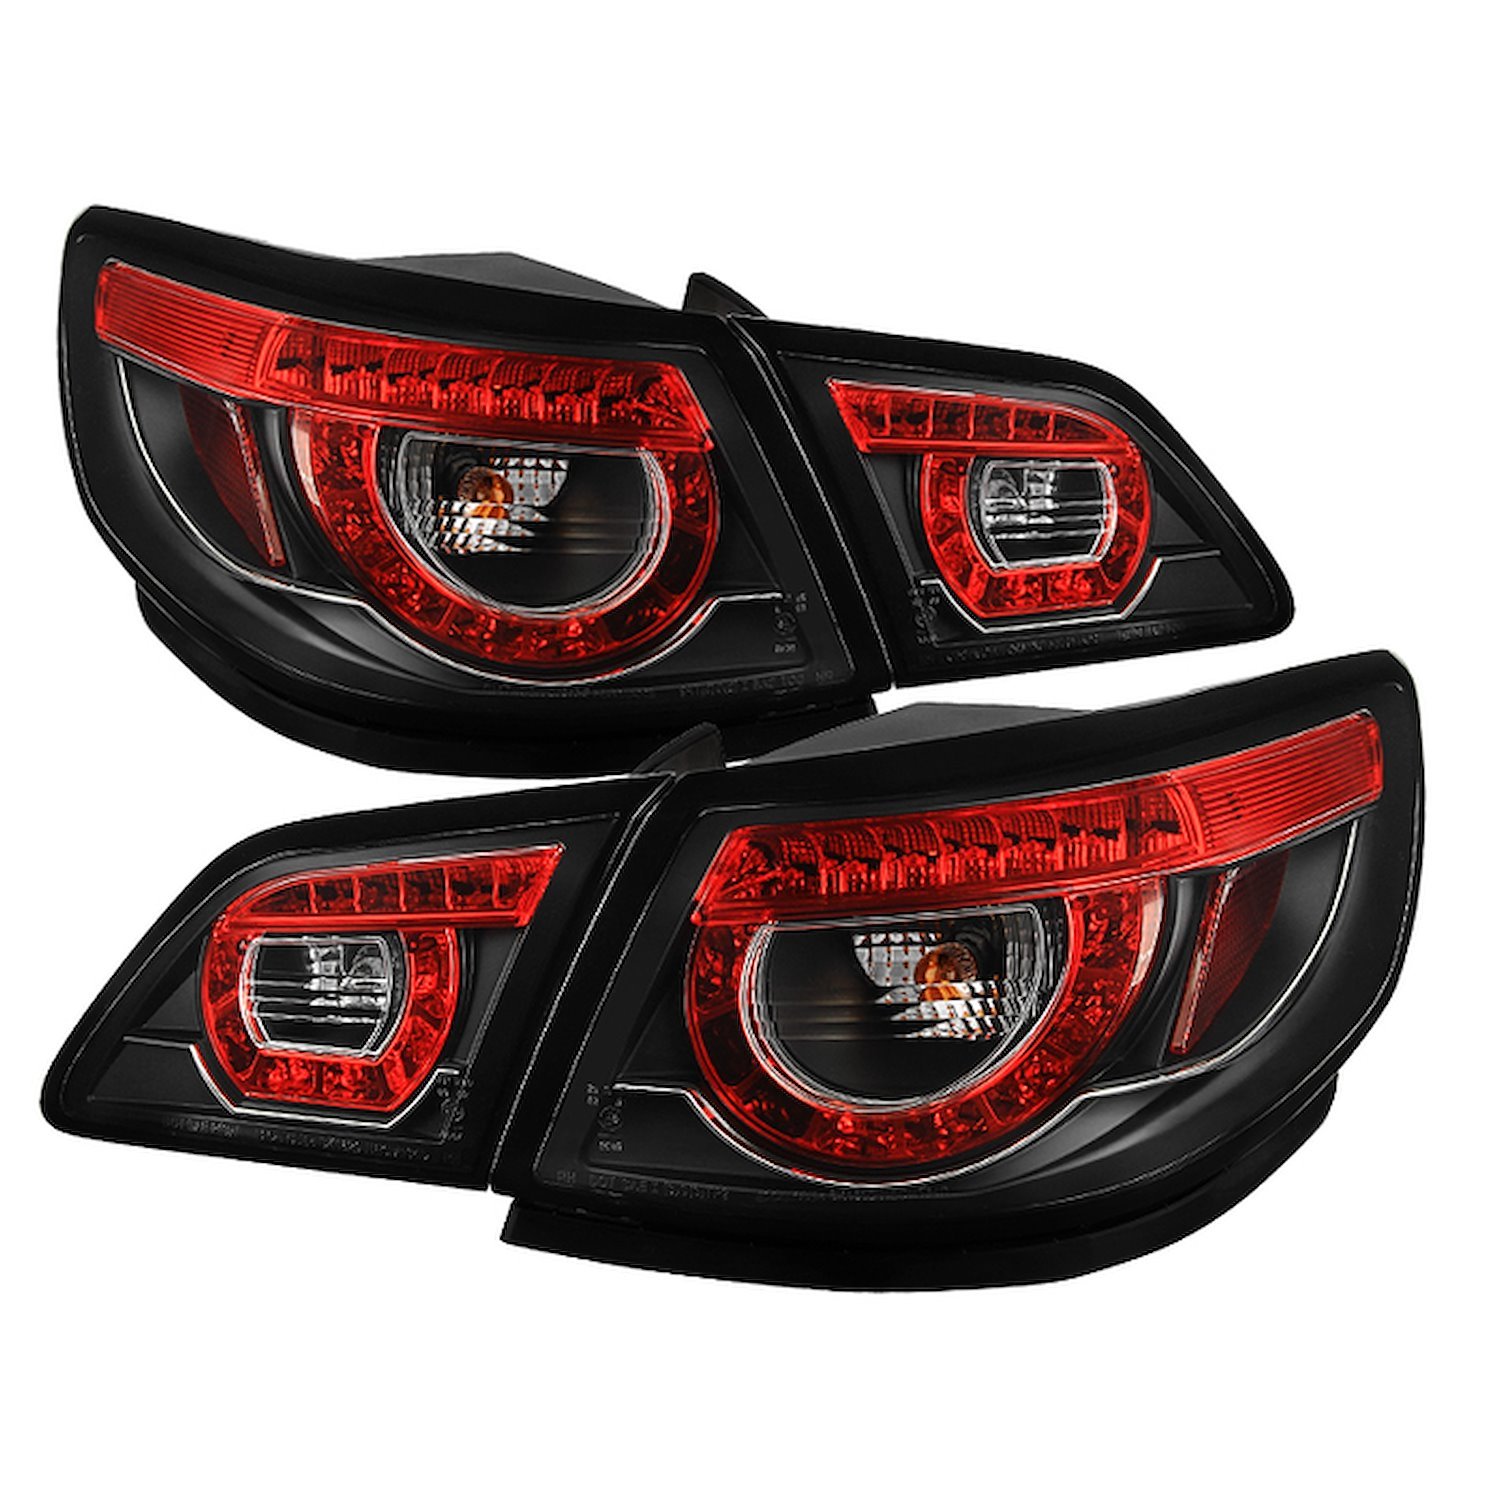 LED Tail Lights 2014-2016 Chevy SS